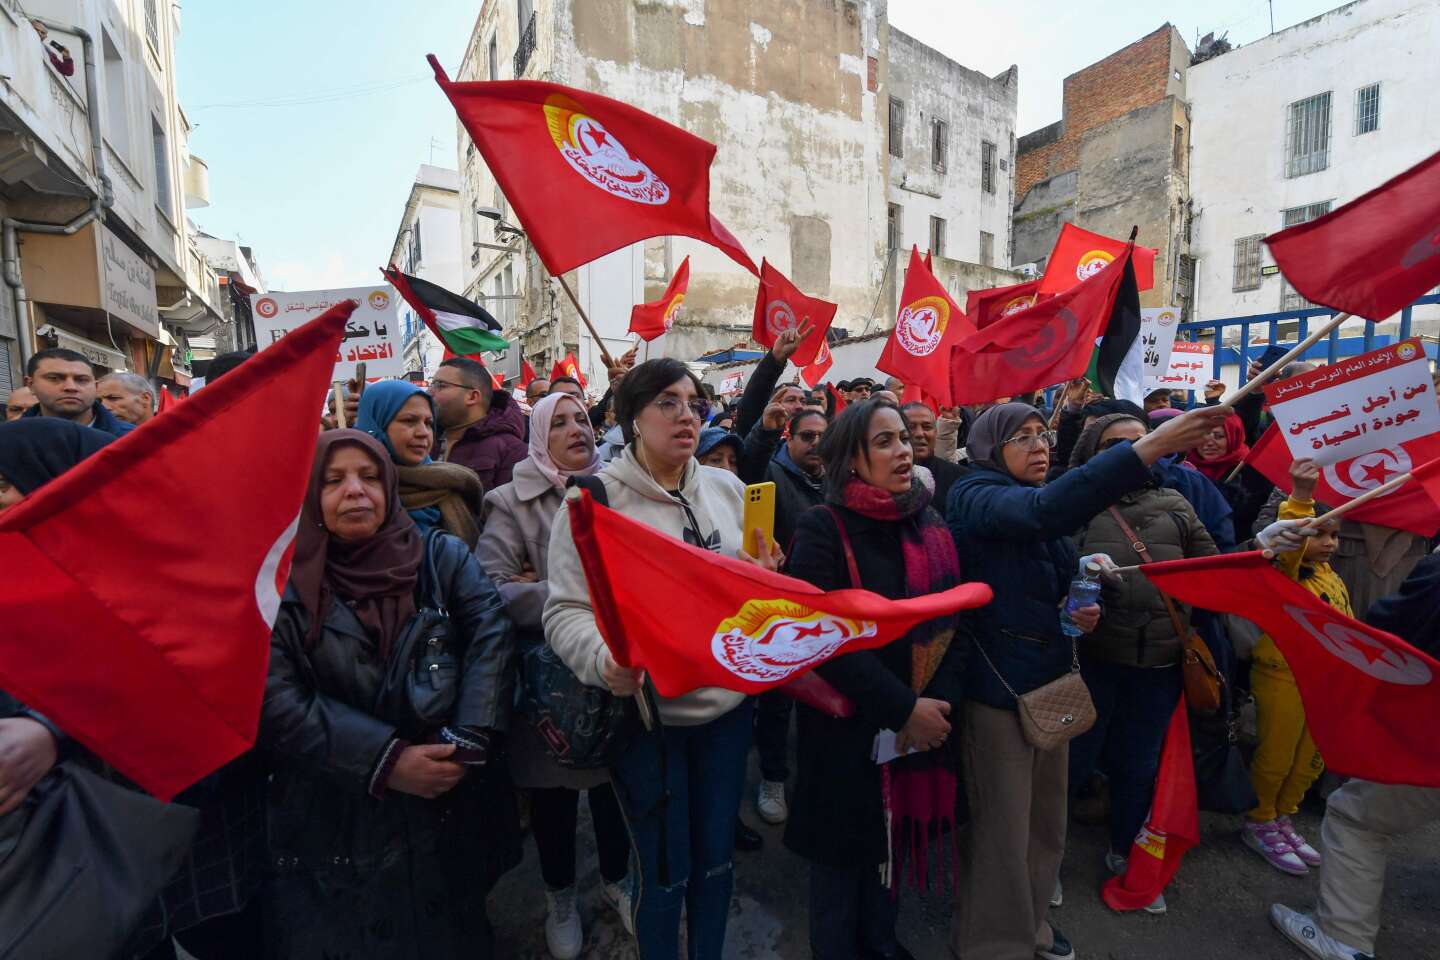 In Tunisia, thousands of people demonstrated against the authoritarian drift of President Kais Saied